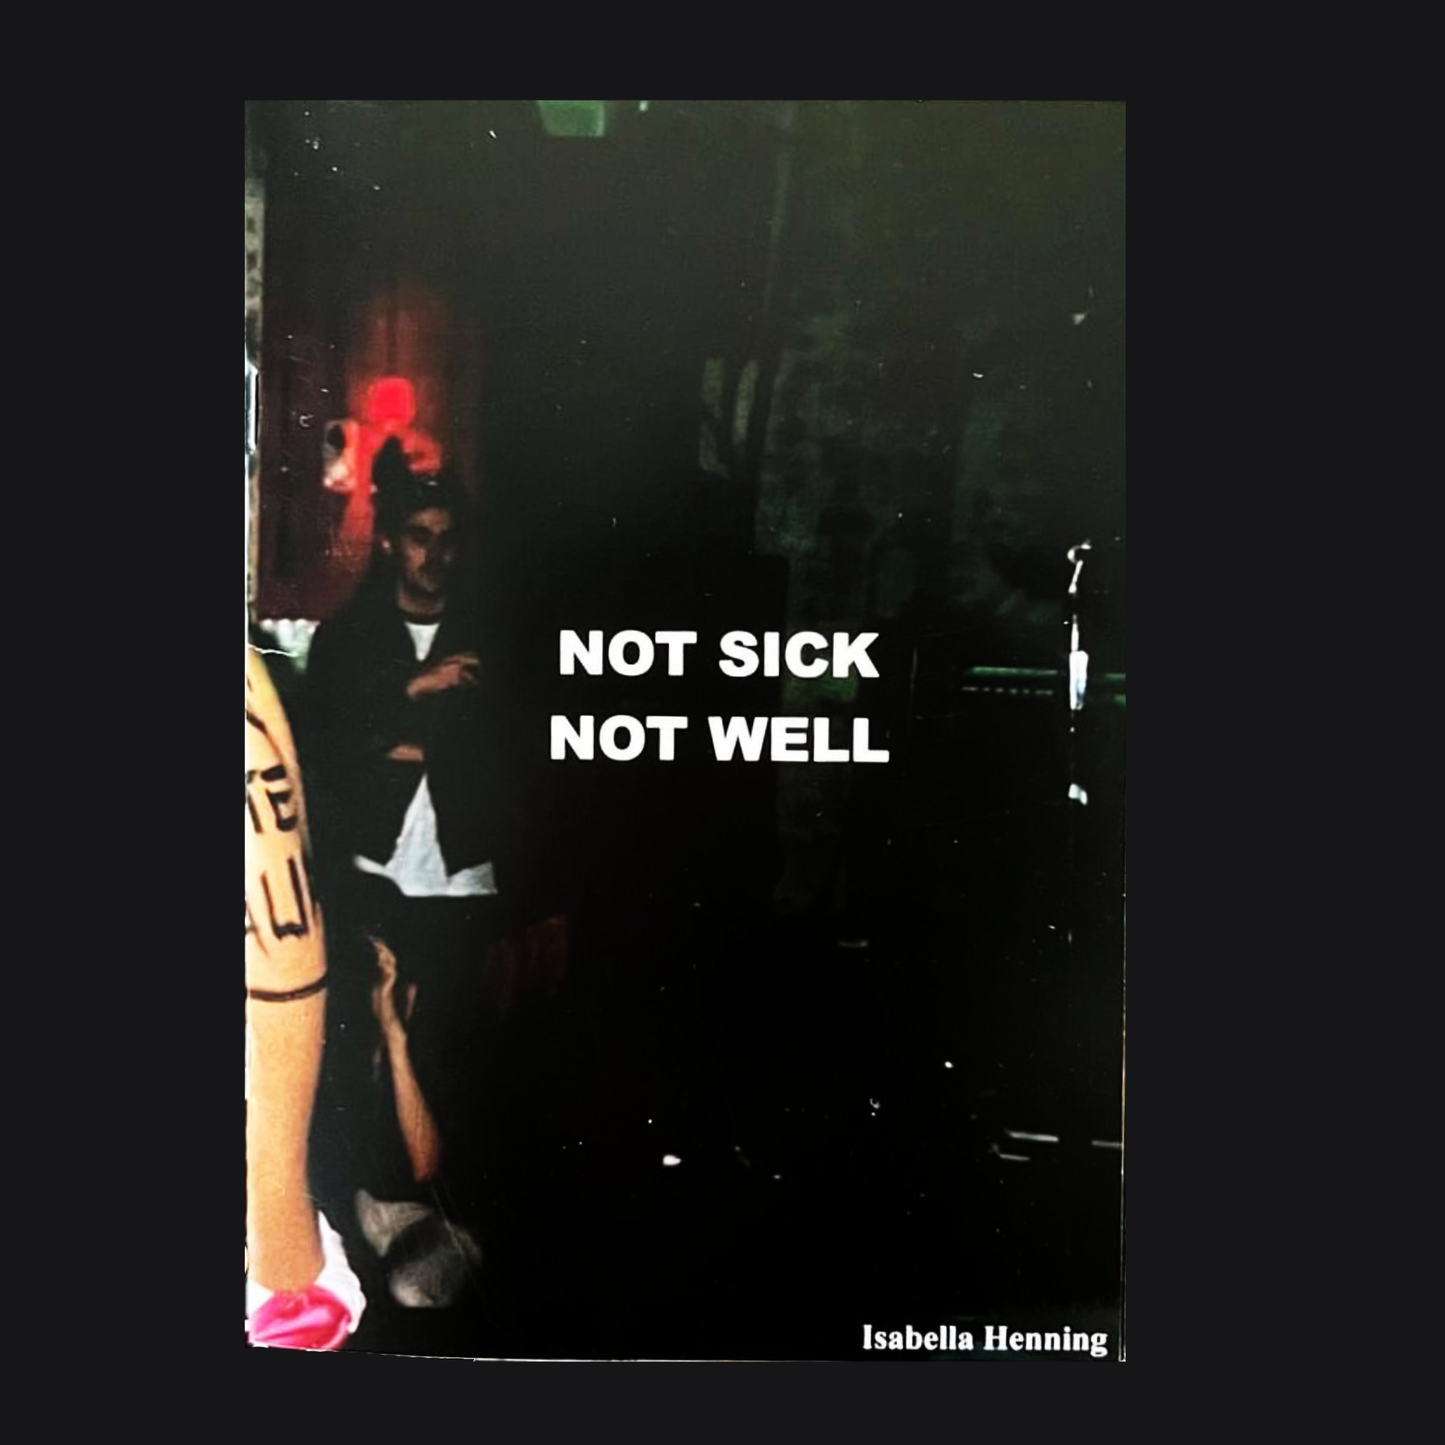 ISABELLA HENNING - "NOT SICK, NOT WELL" MAG